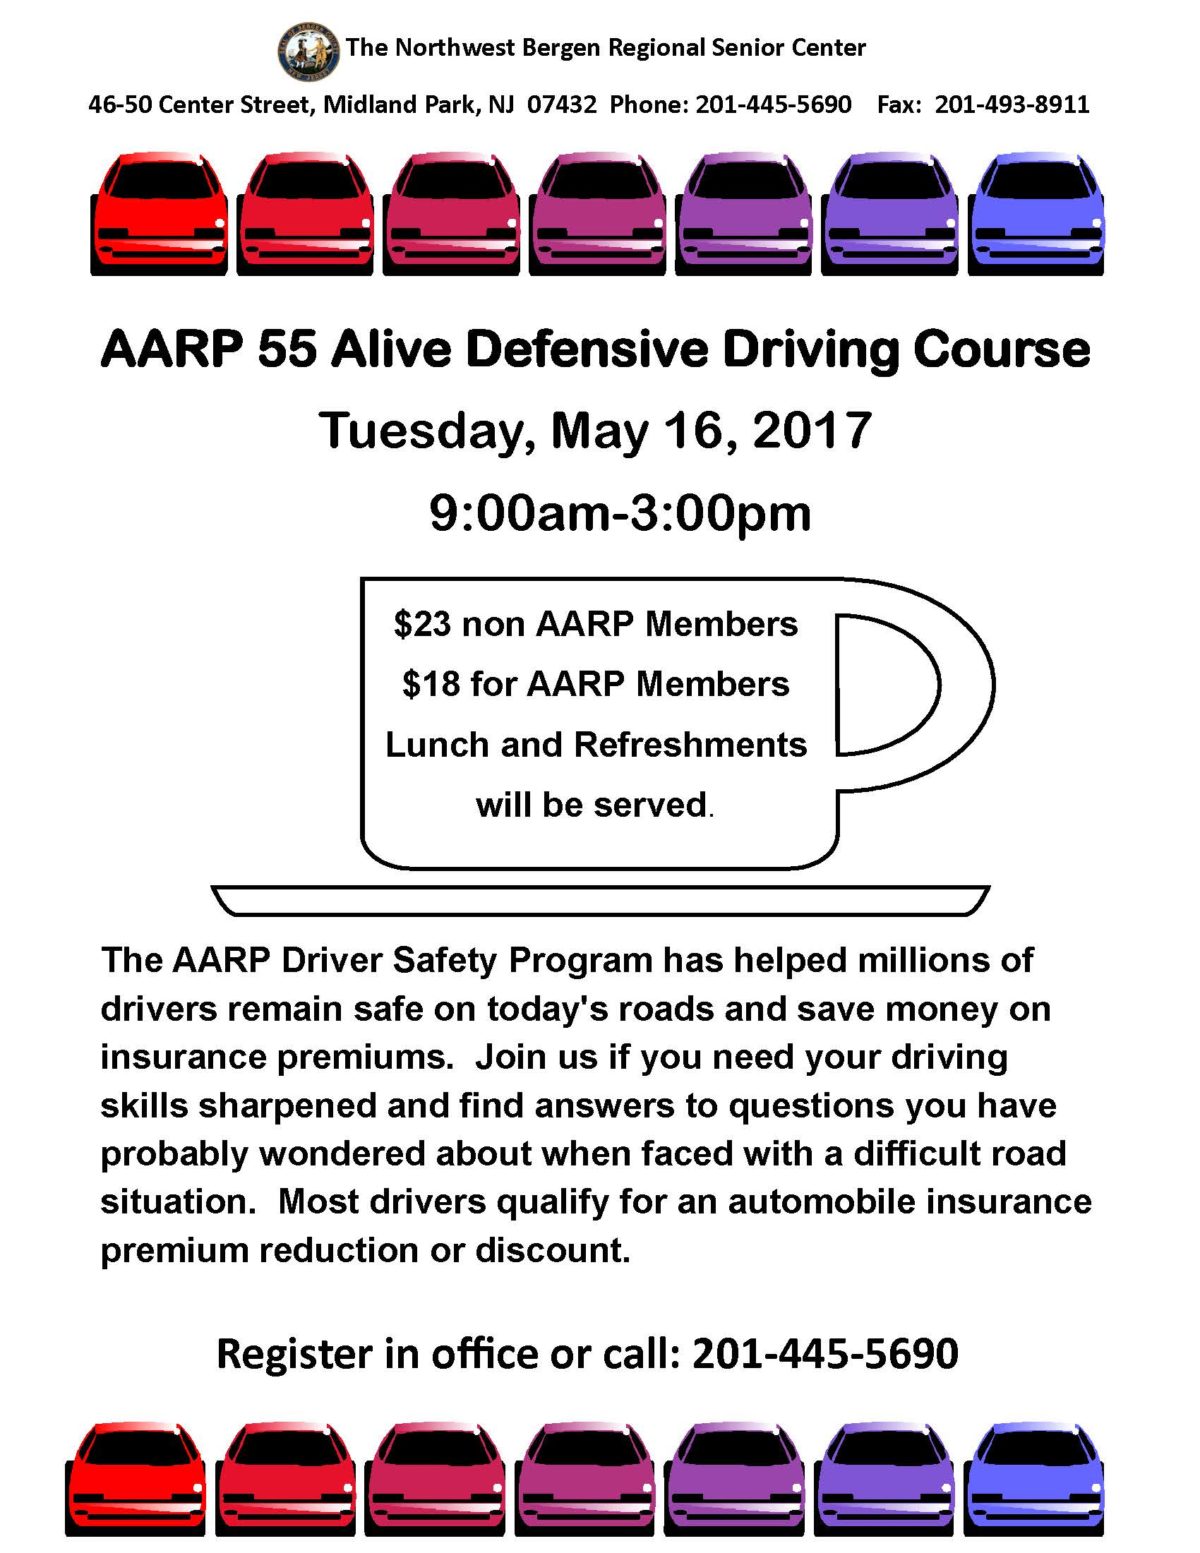 Defensive Driving Course 5.16.17